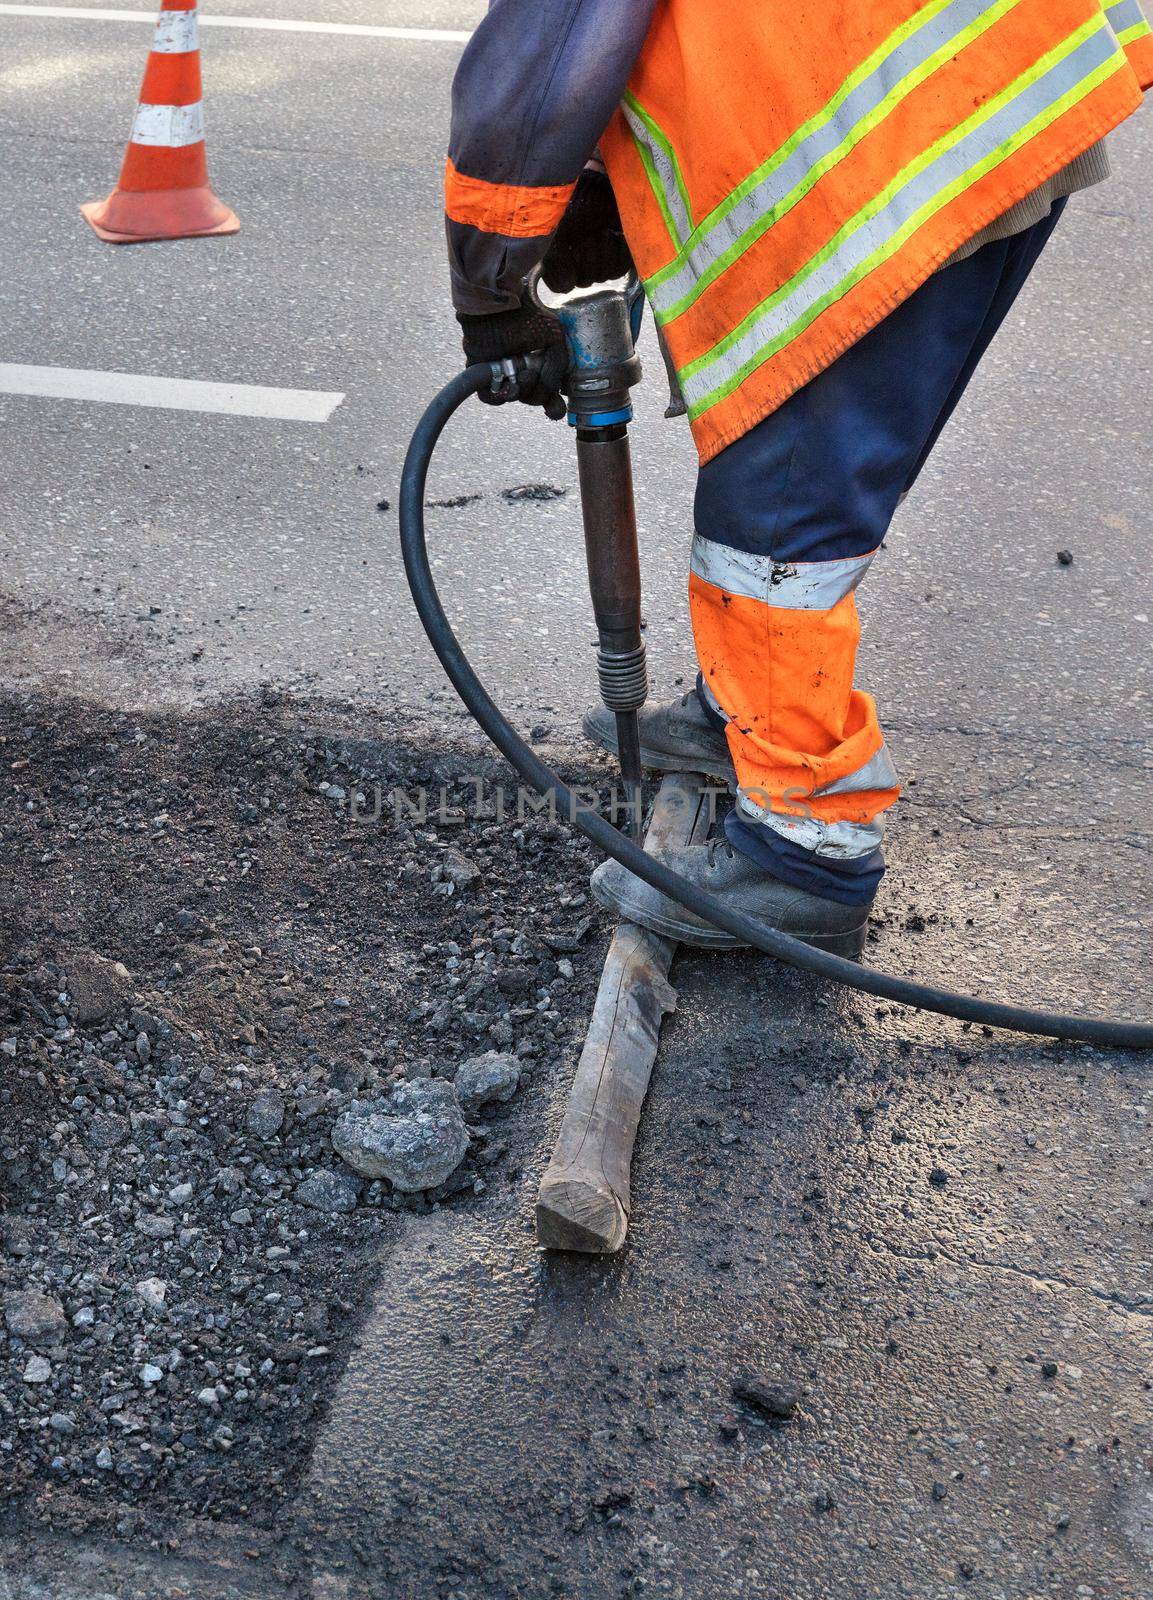 A road worker clears some of the asphalt with a jackhammer while repairing a road. by Sergii